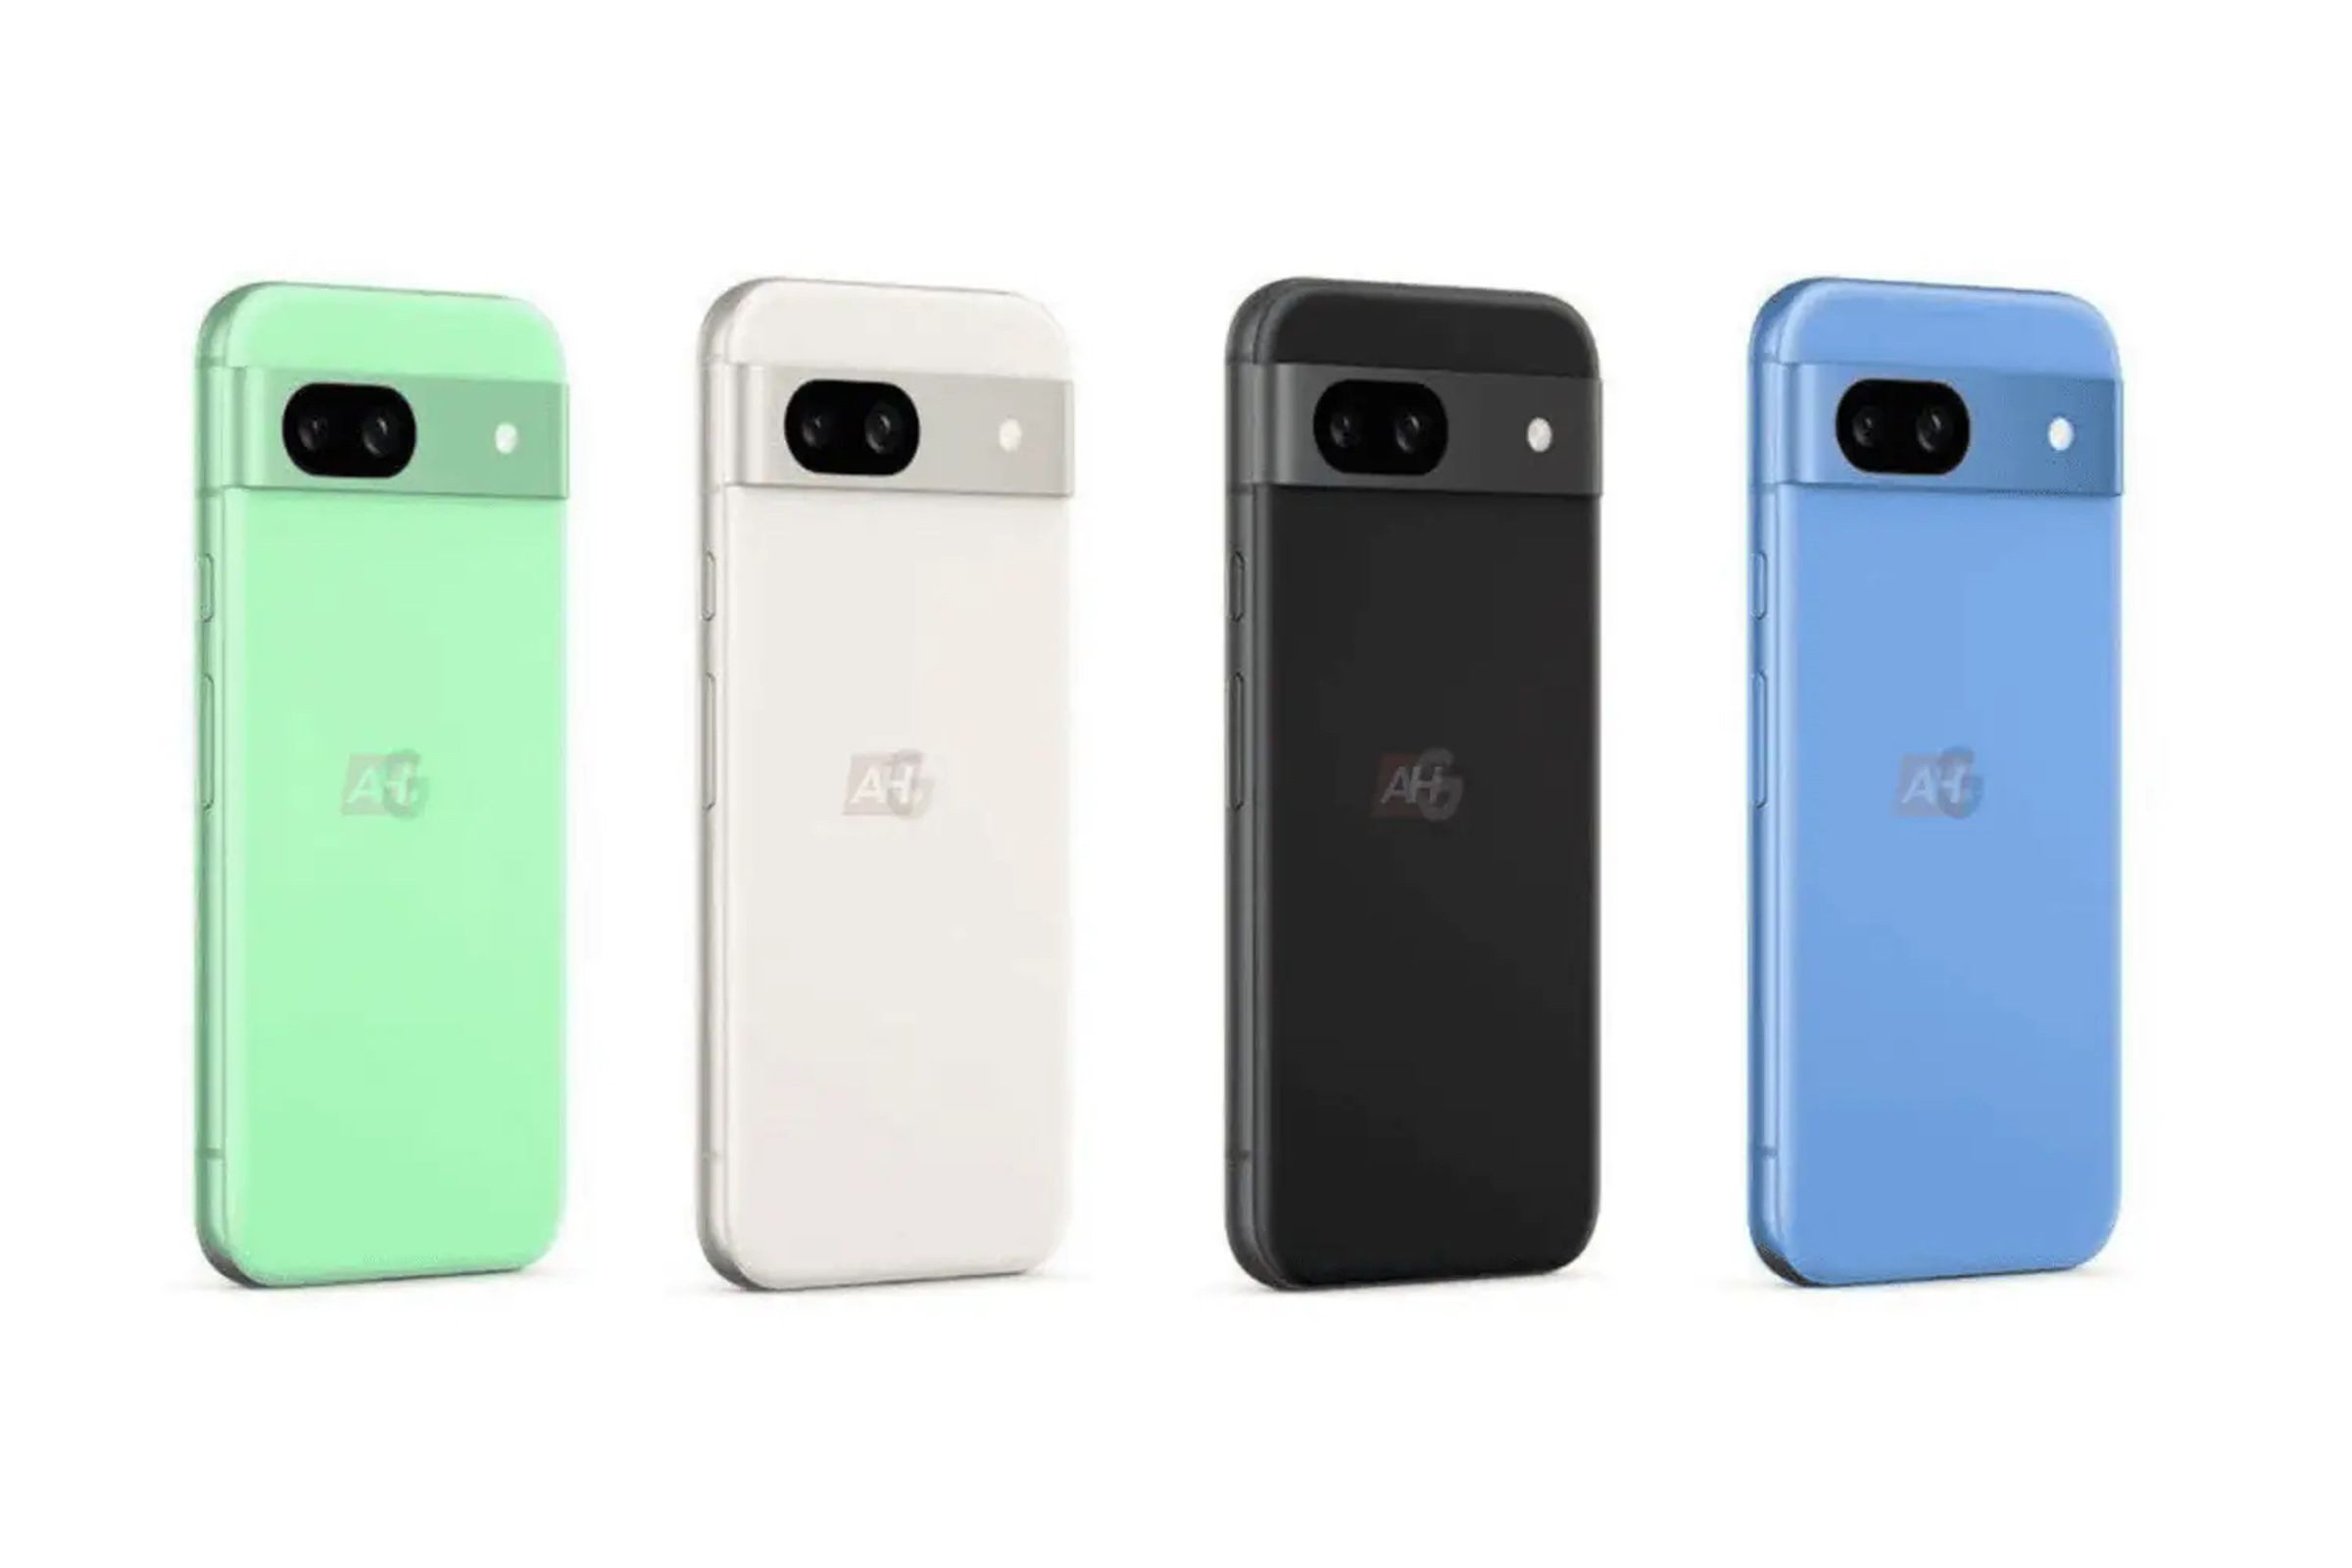 Marketing images of Google’s Pixel 8A phone in four colors.